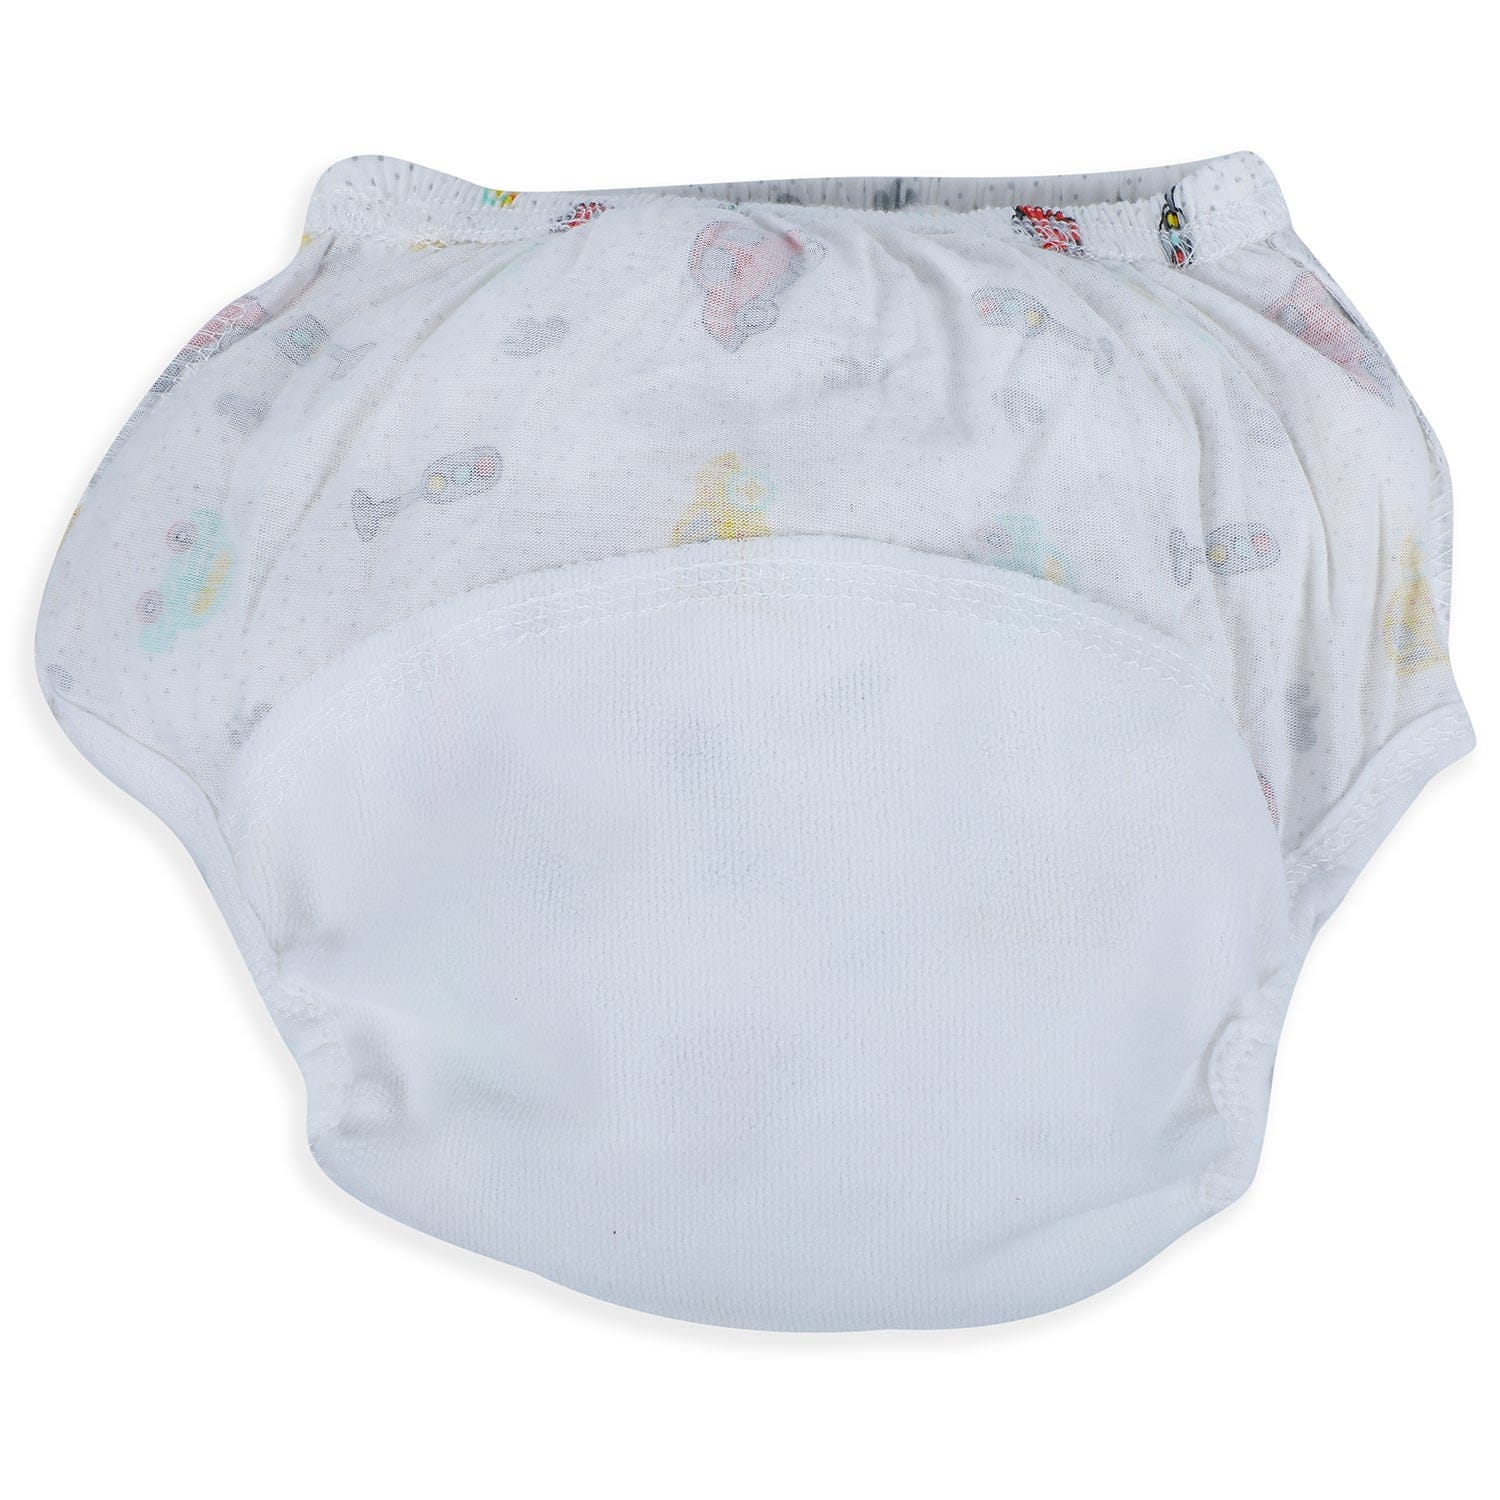 Baby Moo Vehicle Reusable Cloth Training Diaper Panty - Multicolour - Baby Moo